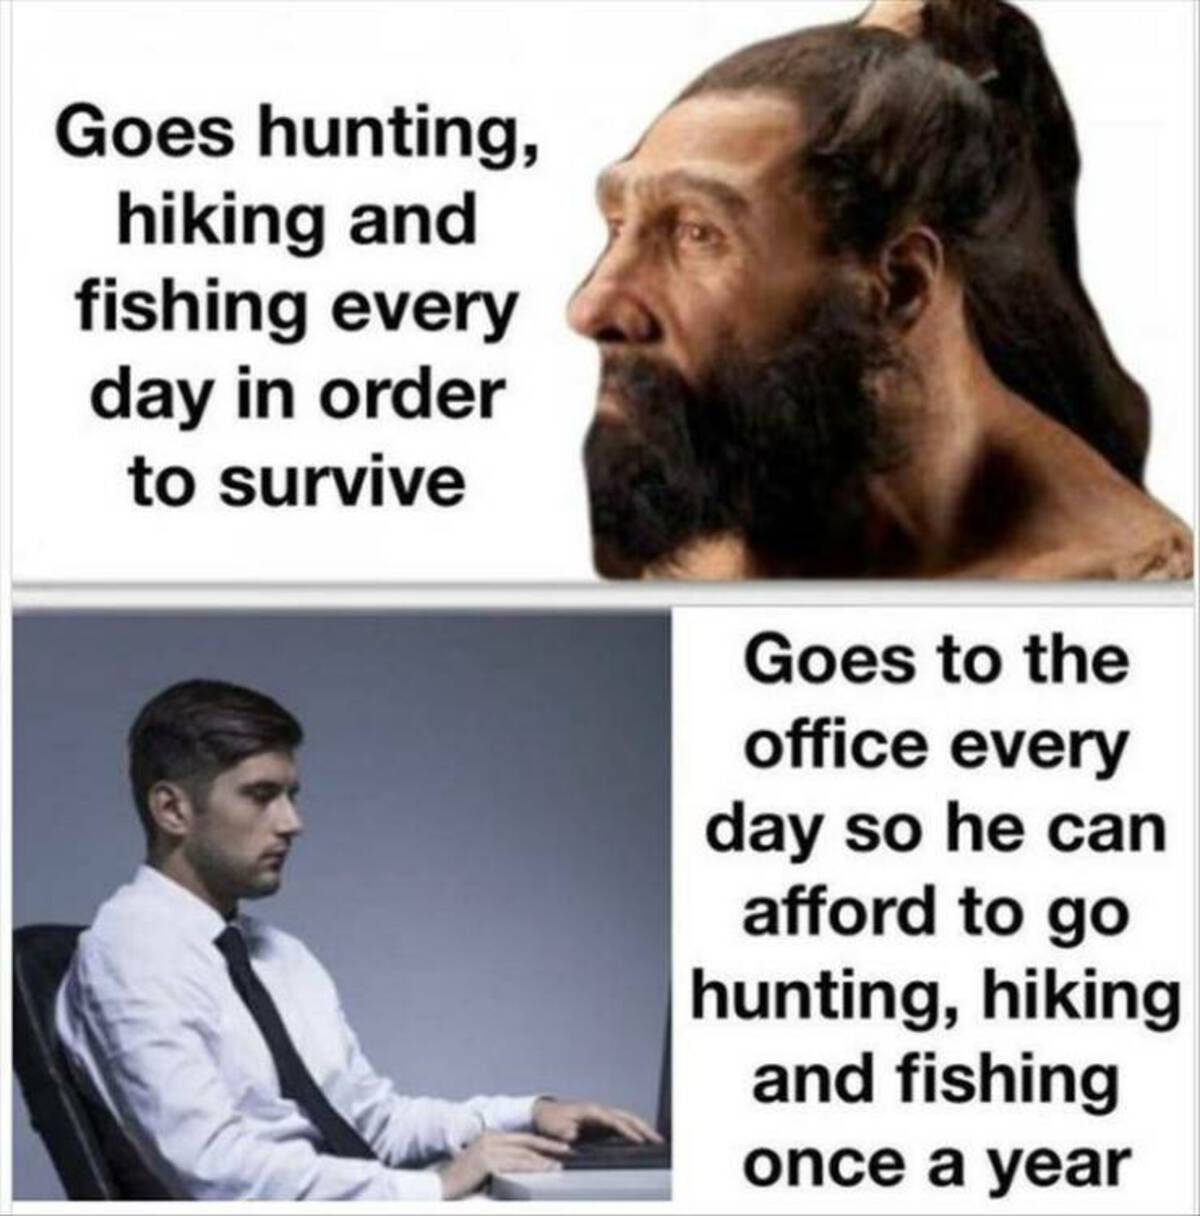 beard - Goes hunting, hiking and fishing every day in order to survive Goes to the office every day so he can afford to go hunting, hiking and fishing once a year